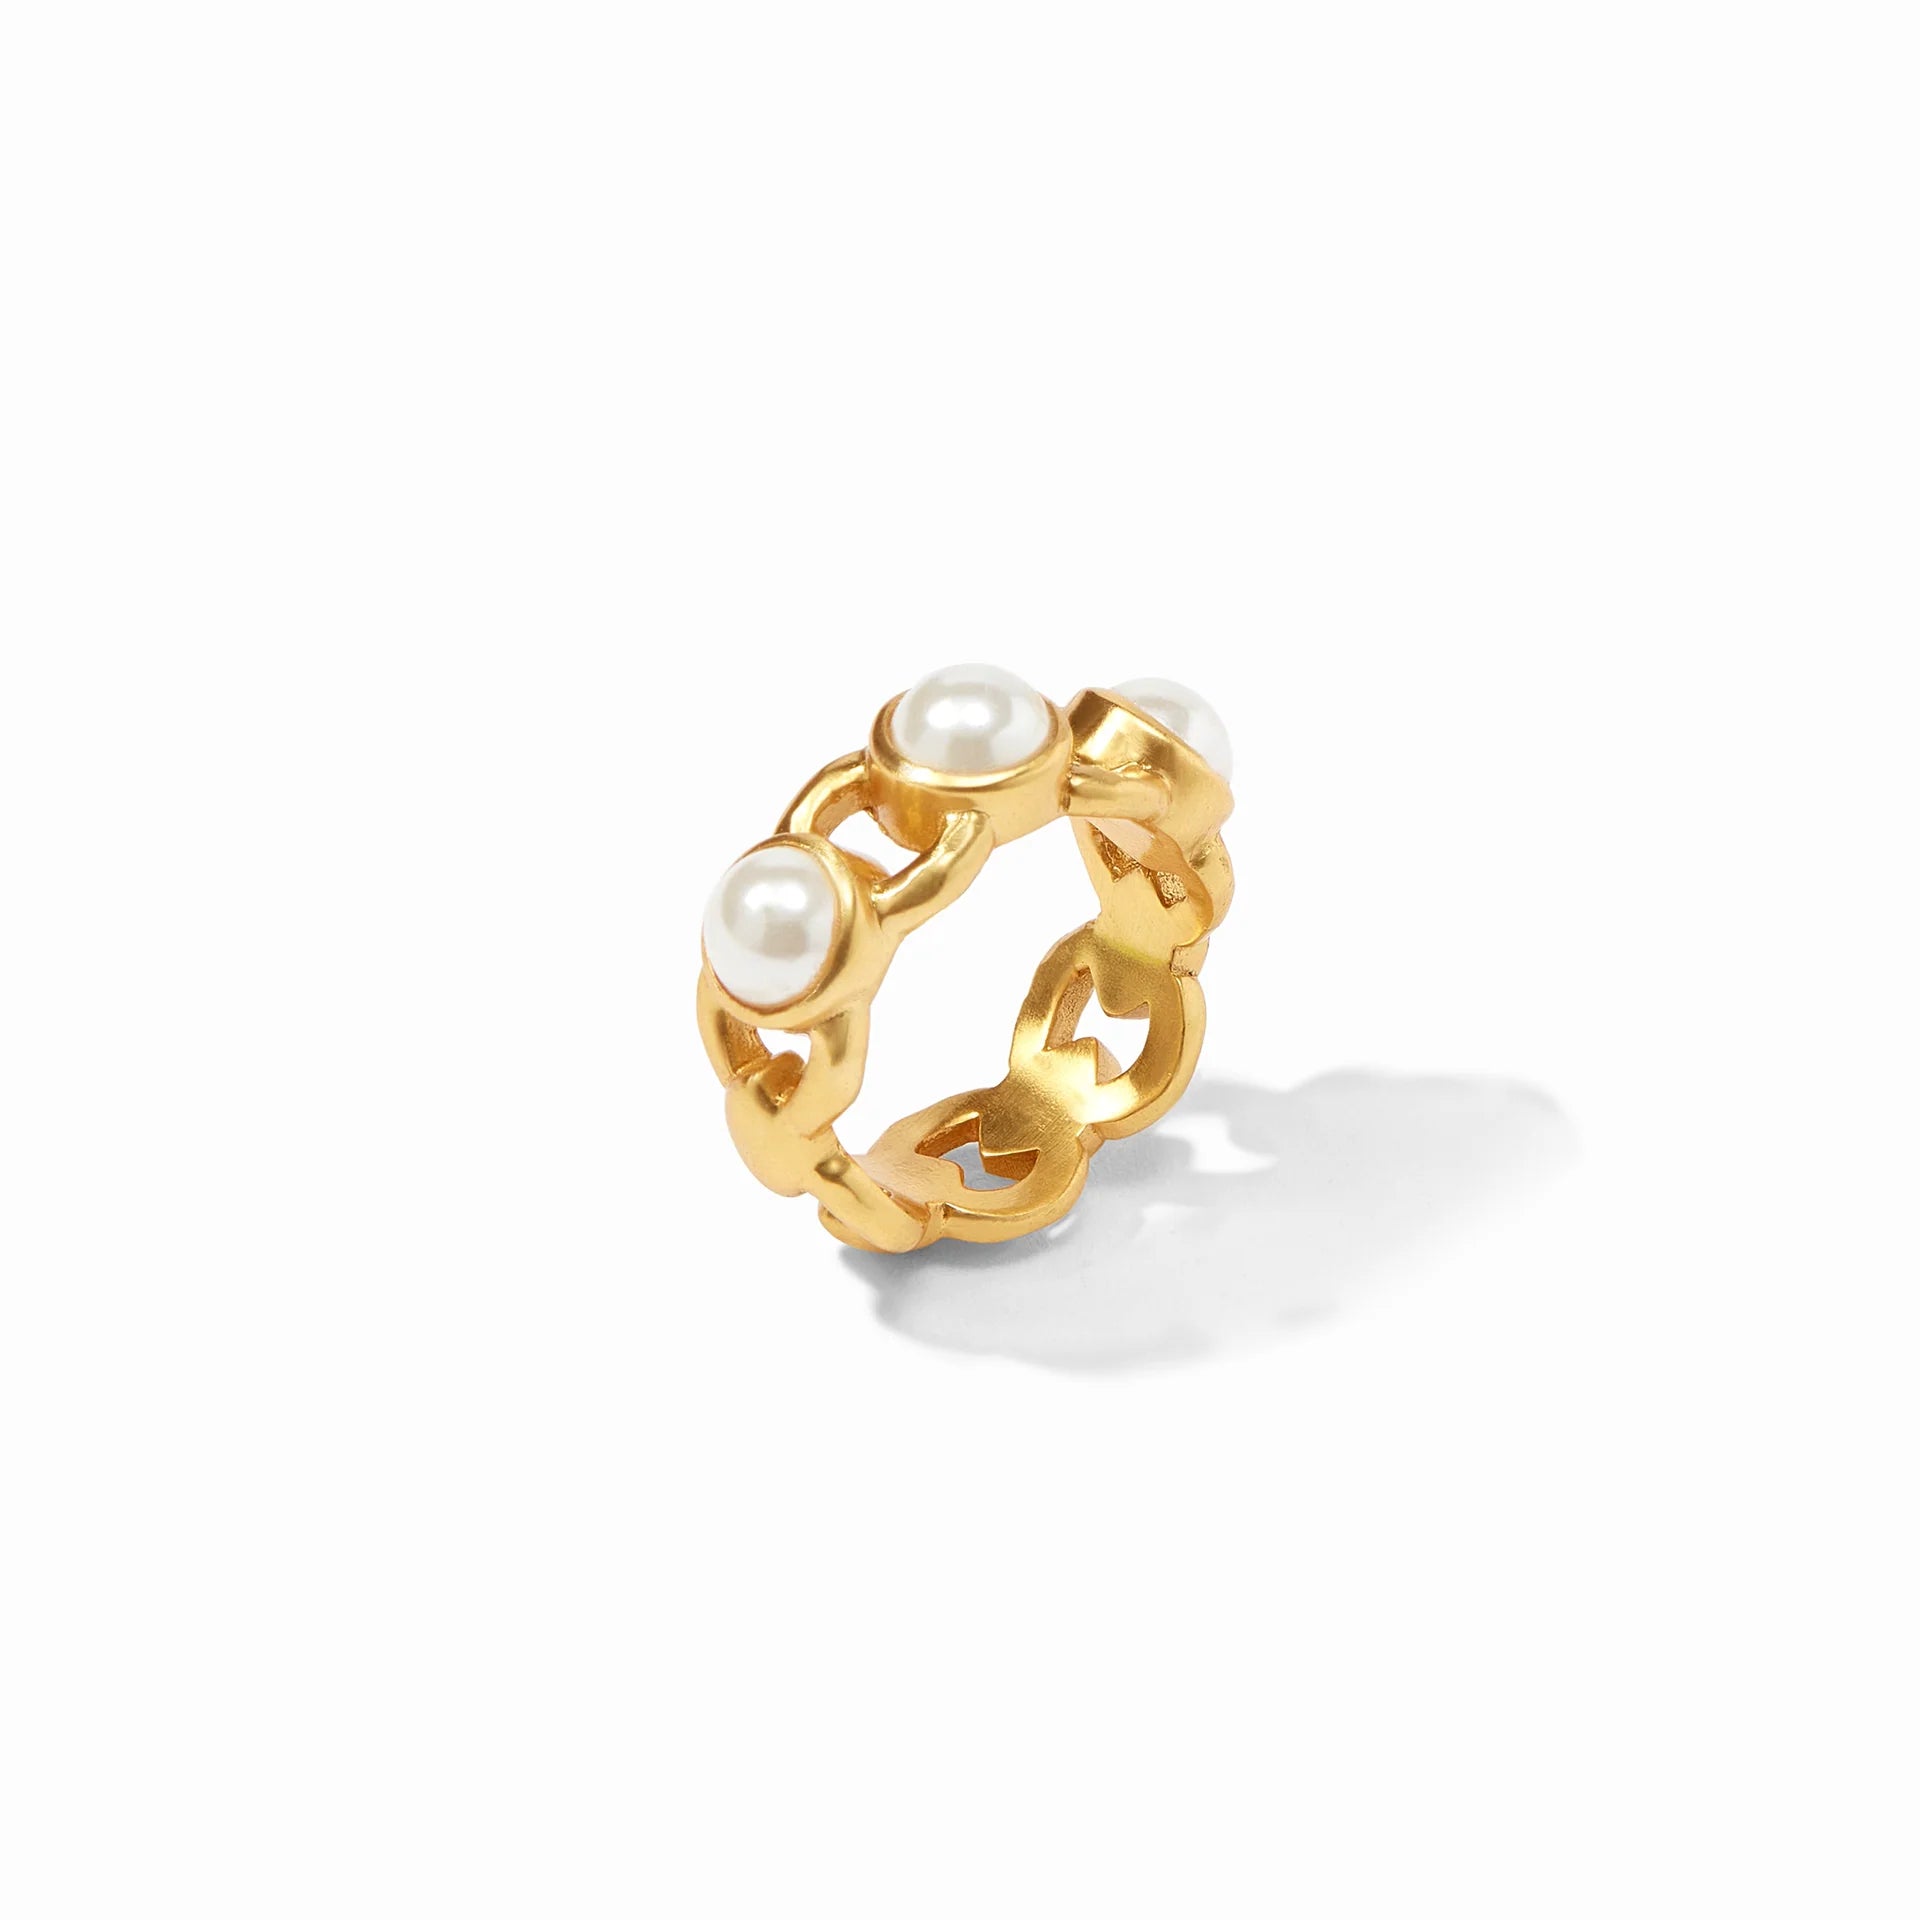 Julie Vos Palermo Pearl Ring - Size 8